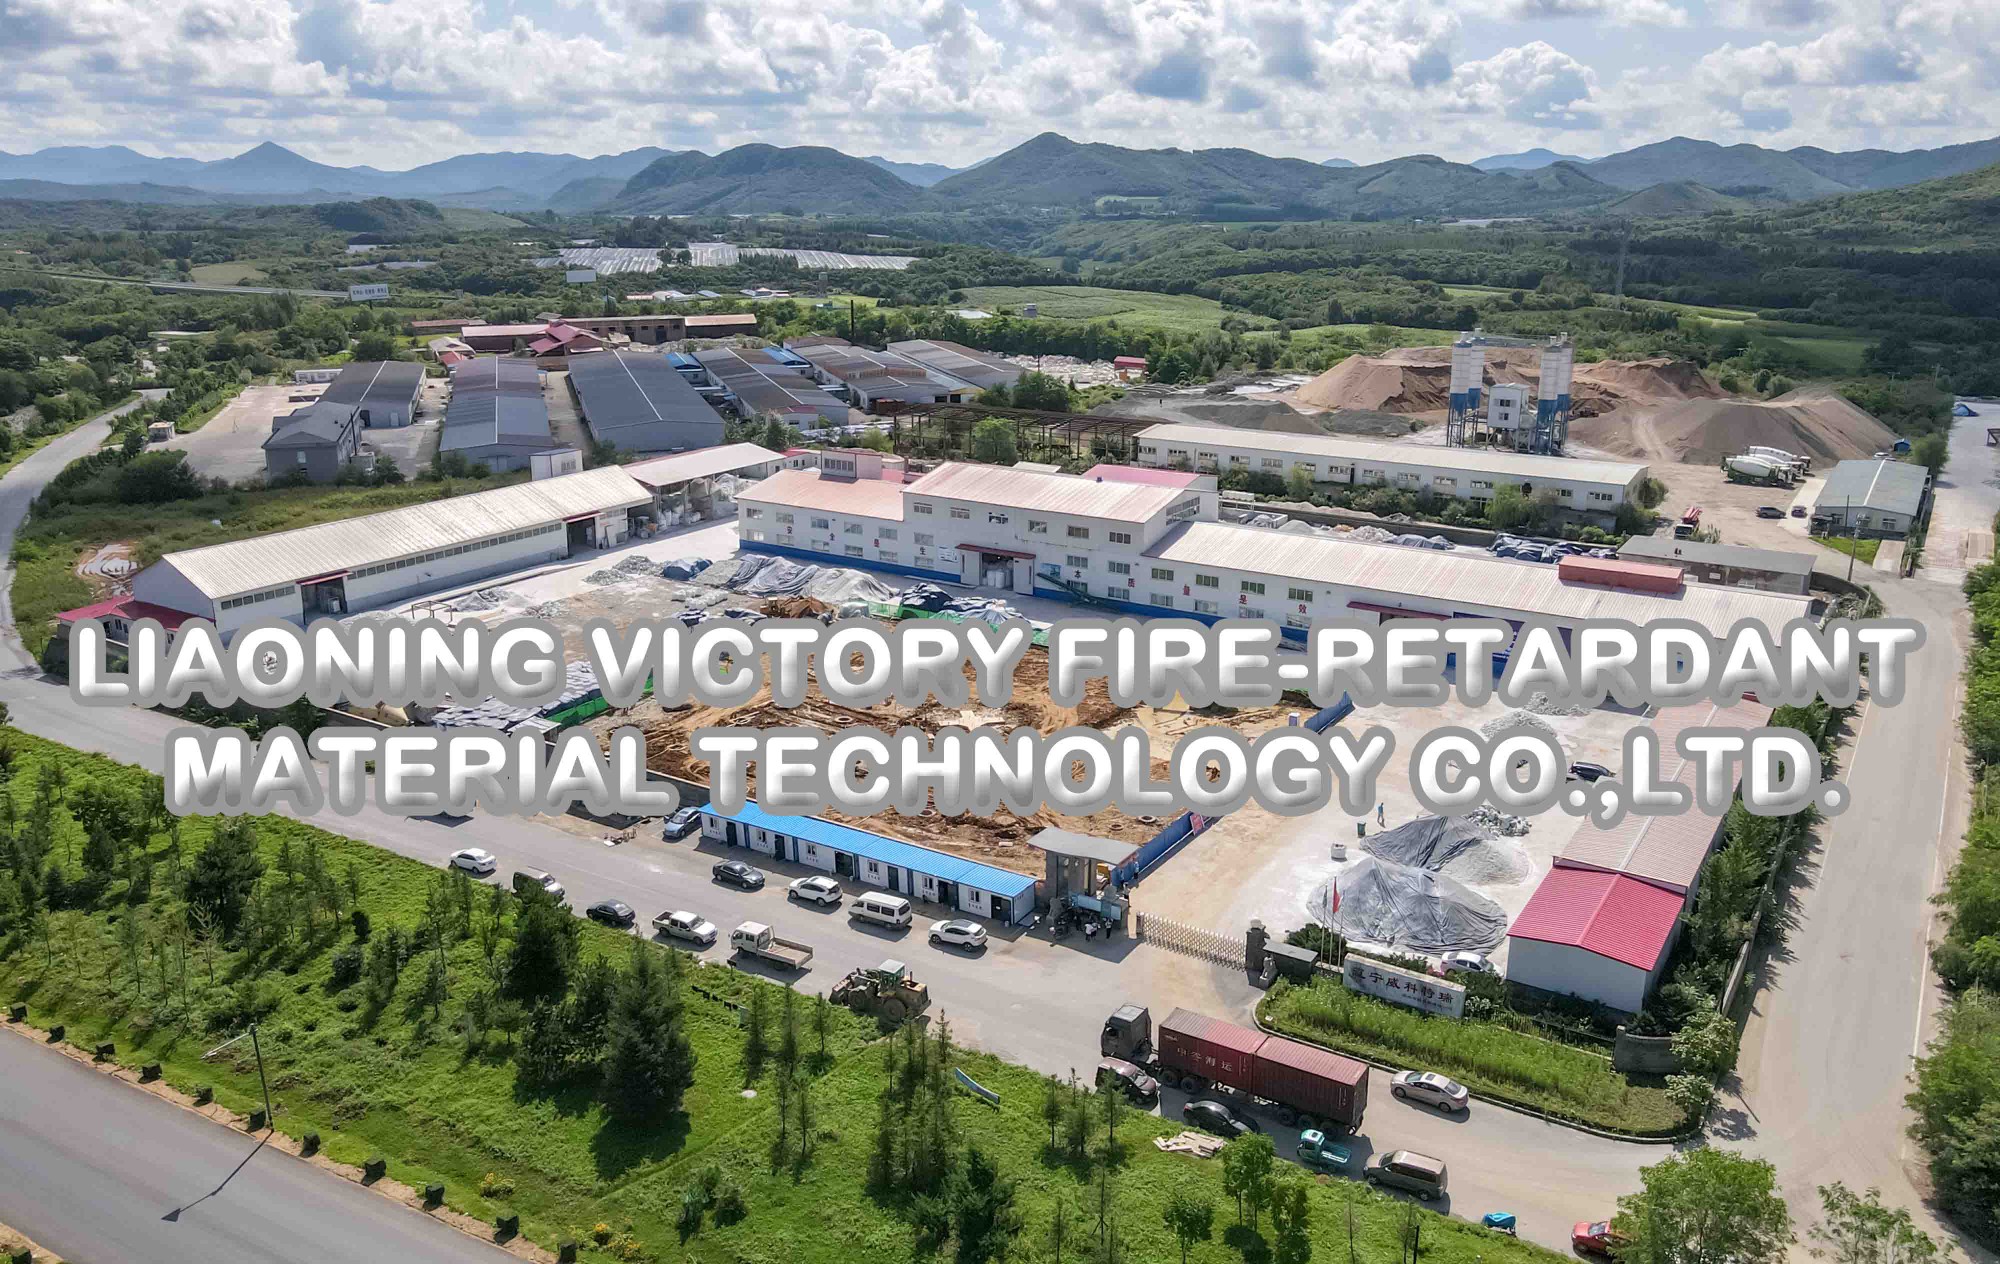 Liaoning Victory Fire-retardant Material Technology Co., Ltd.